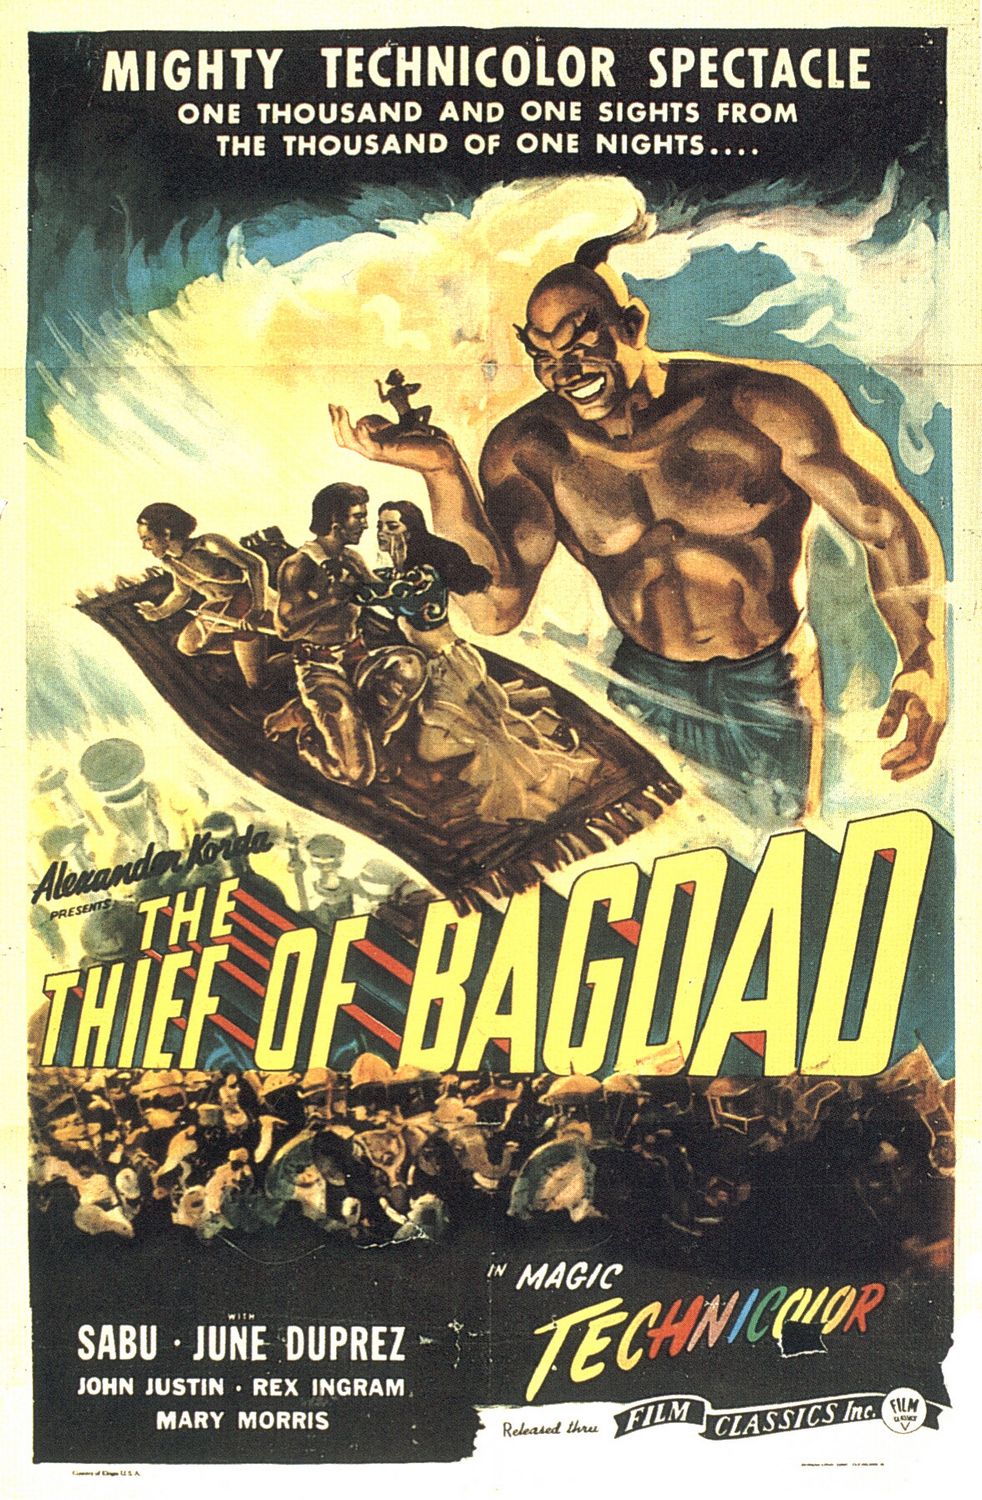 Extra Large Movie Poster Image for The Thief of Bagdad 